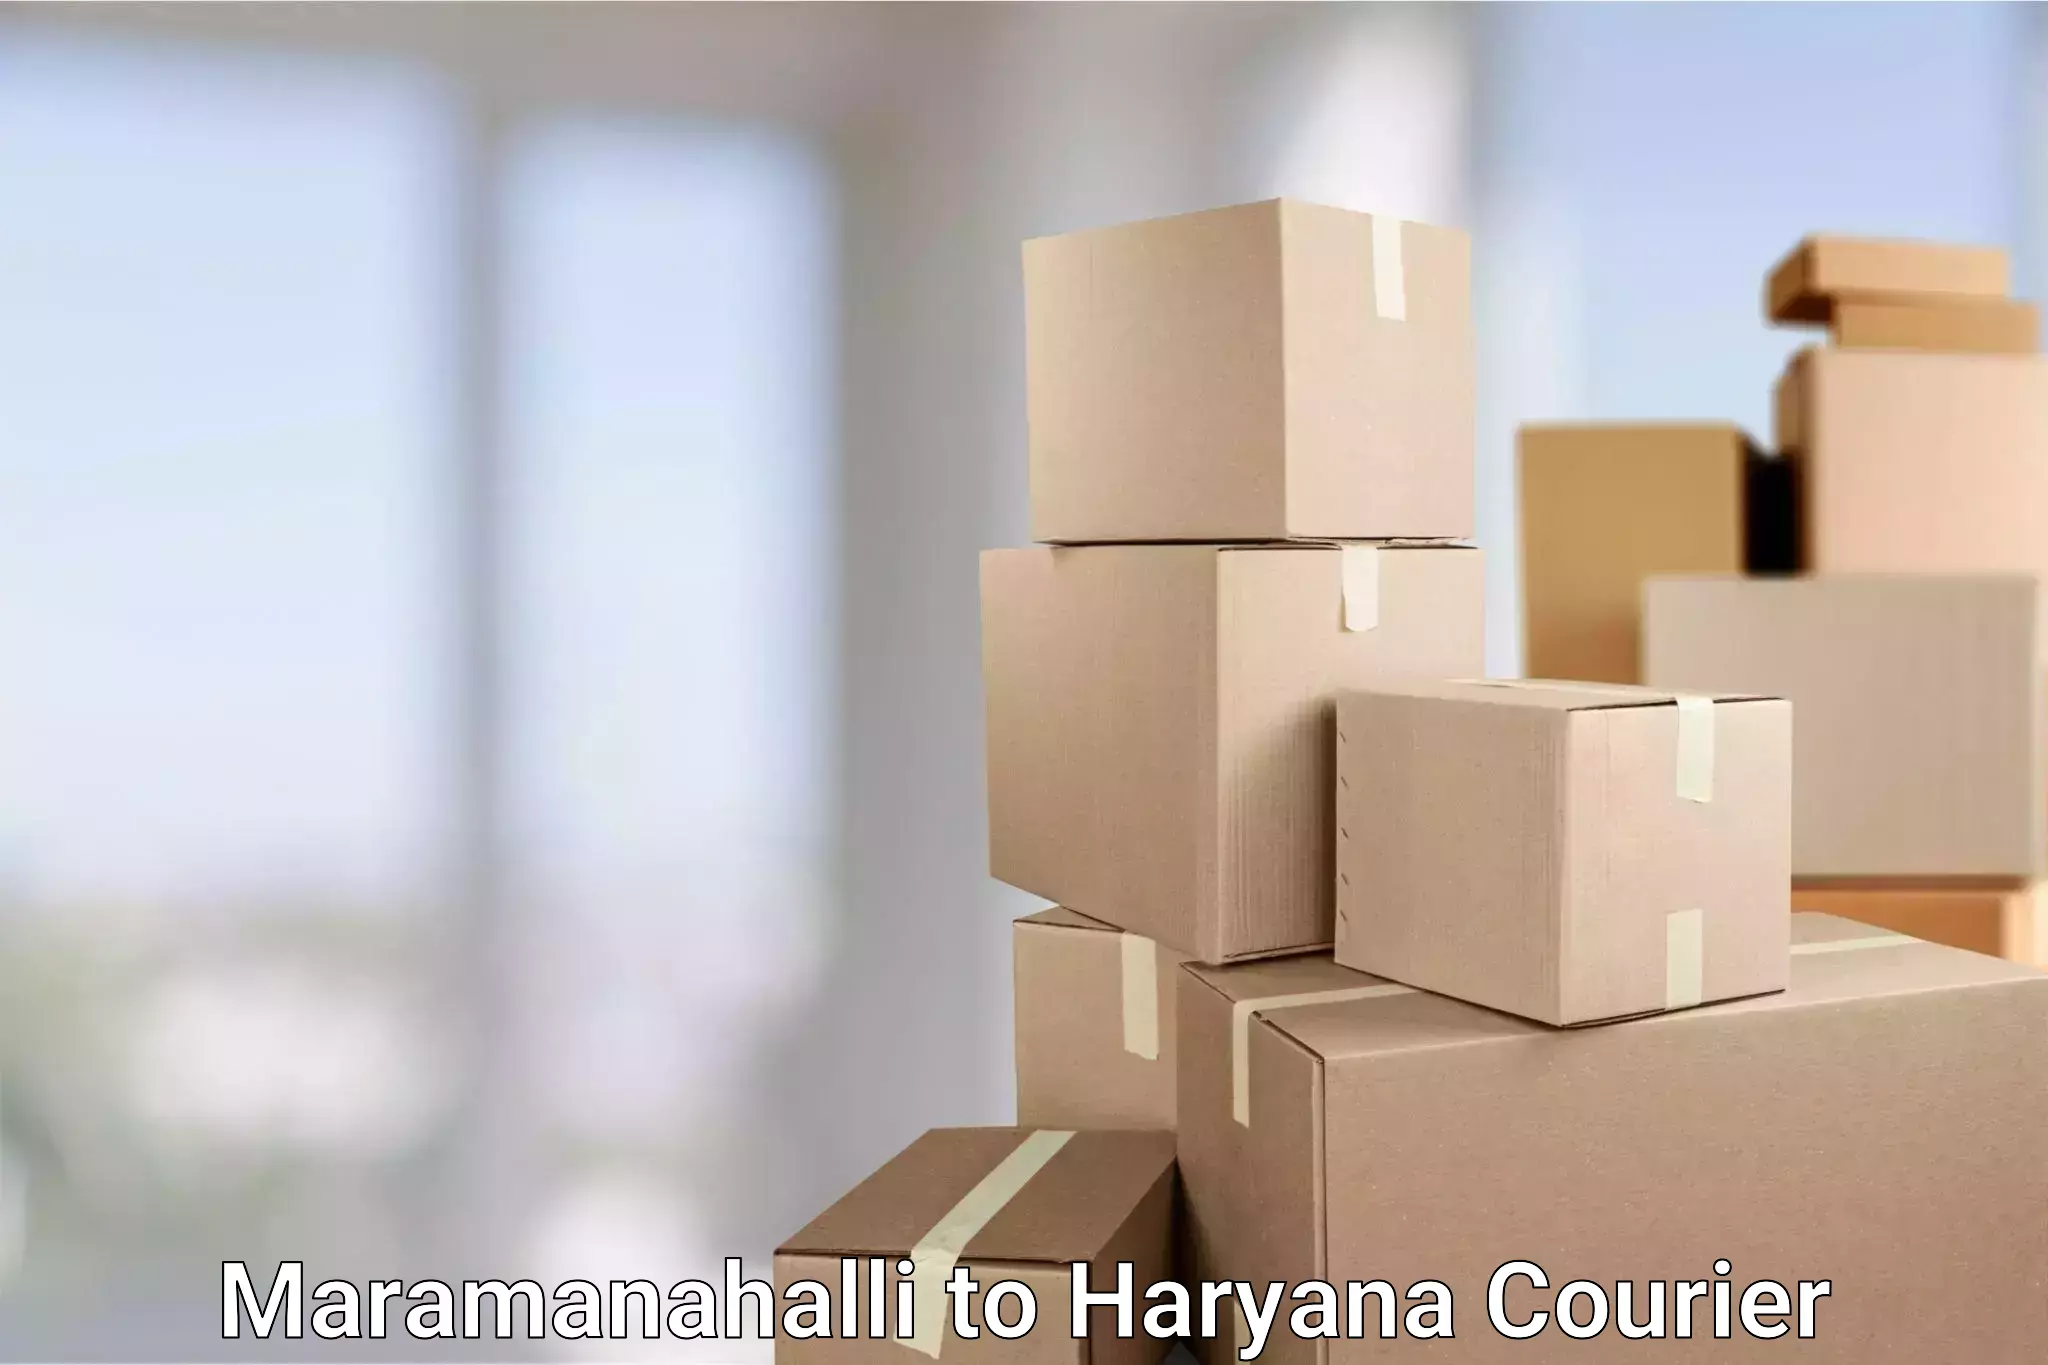 State-of-the-art courier technology Maramanahalli to Meham